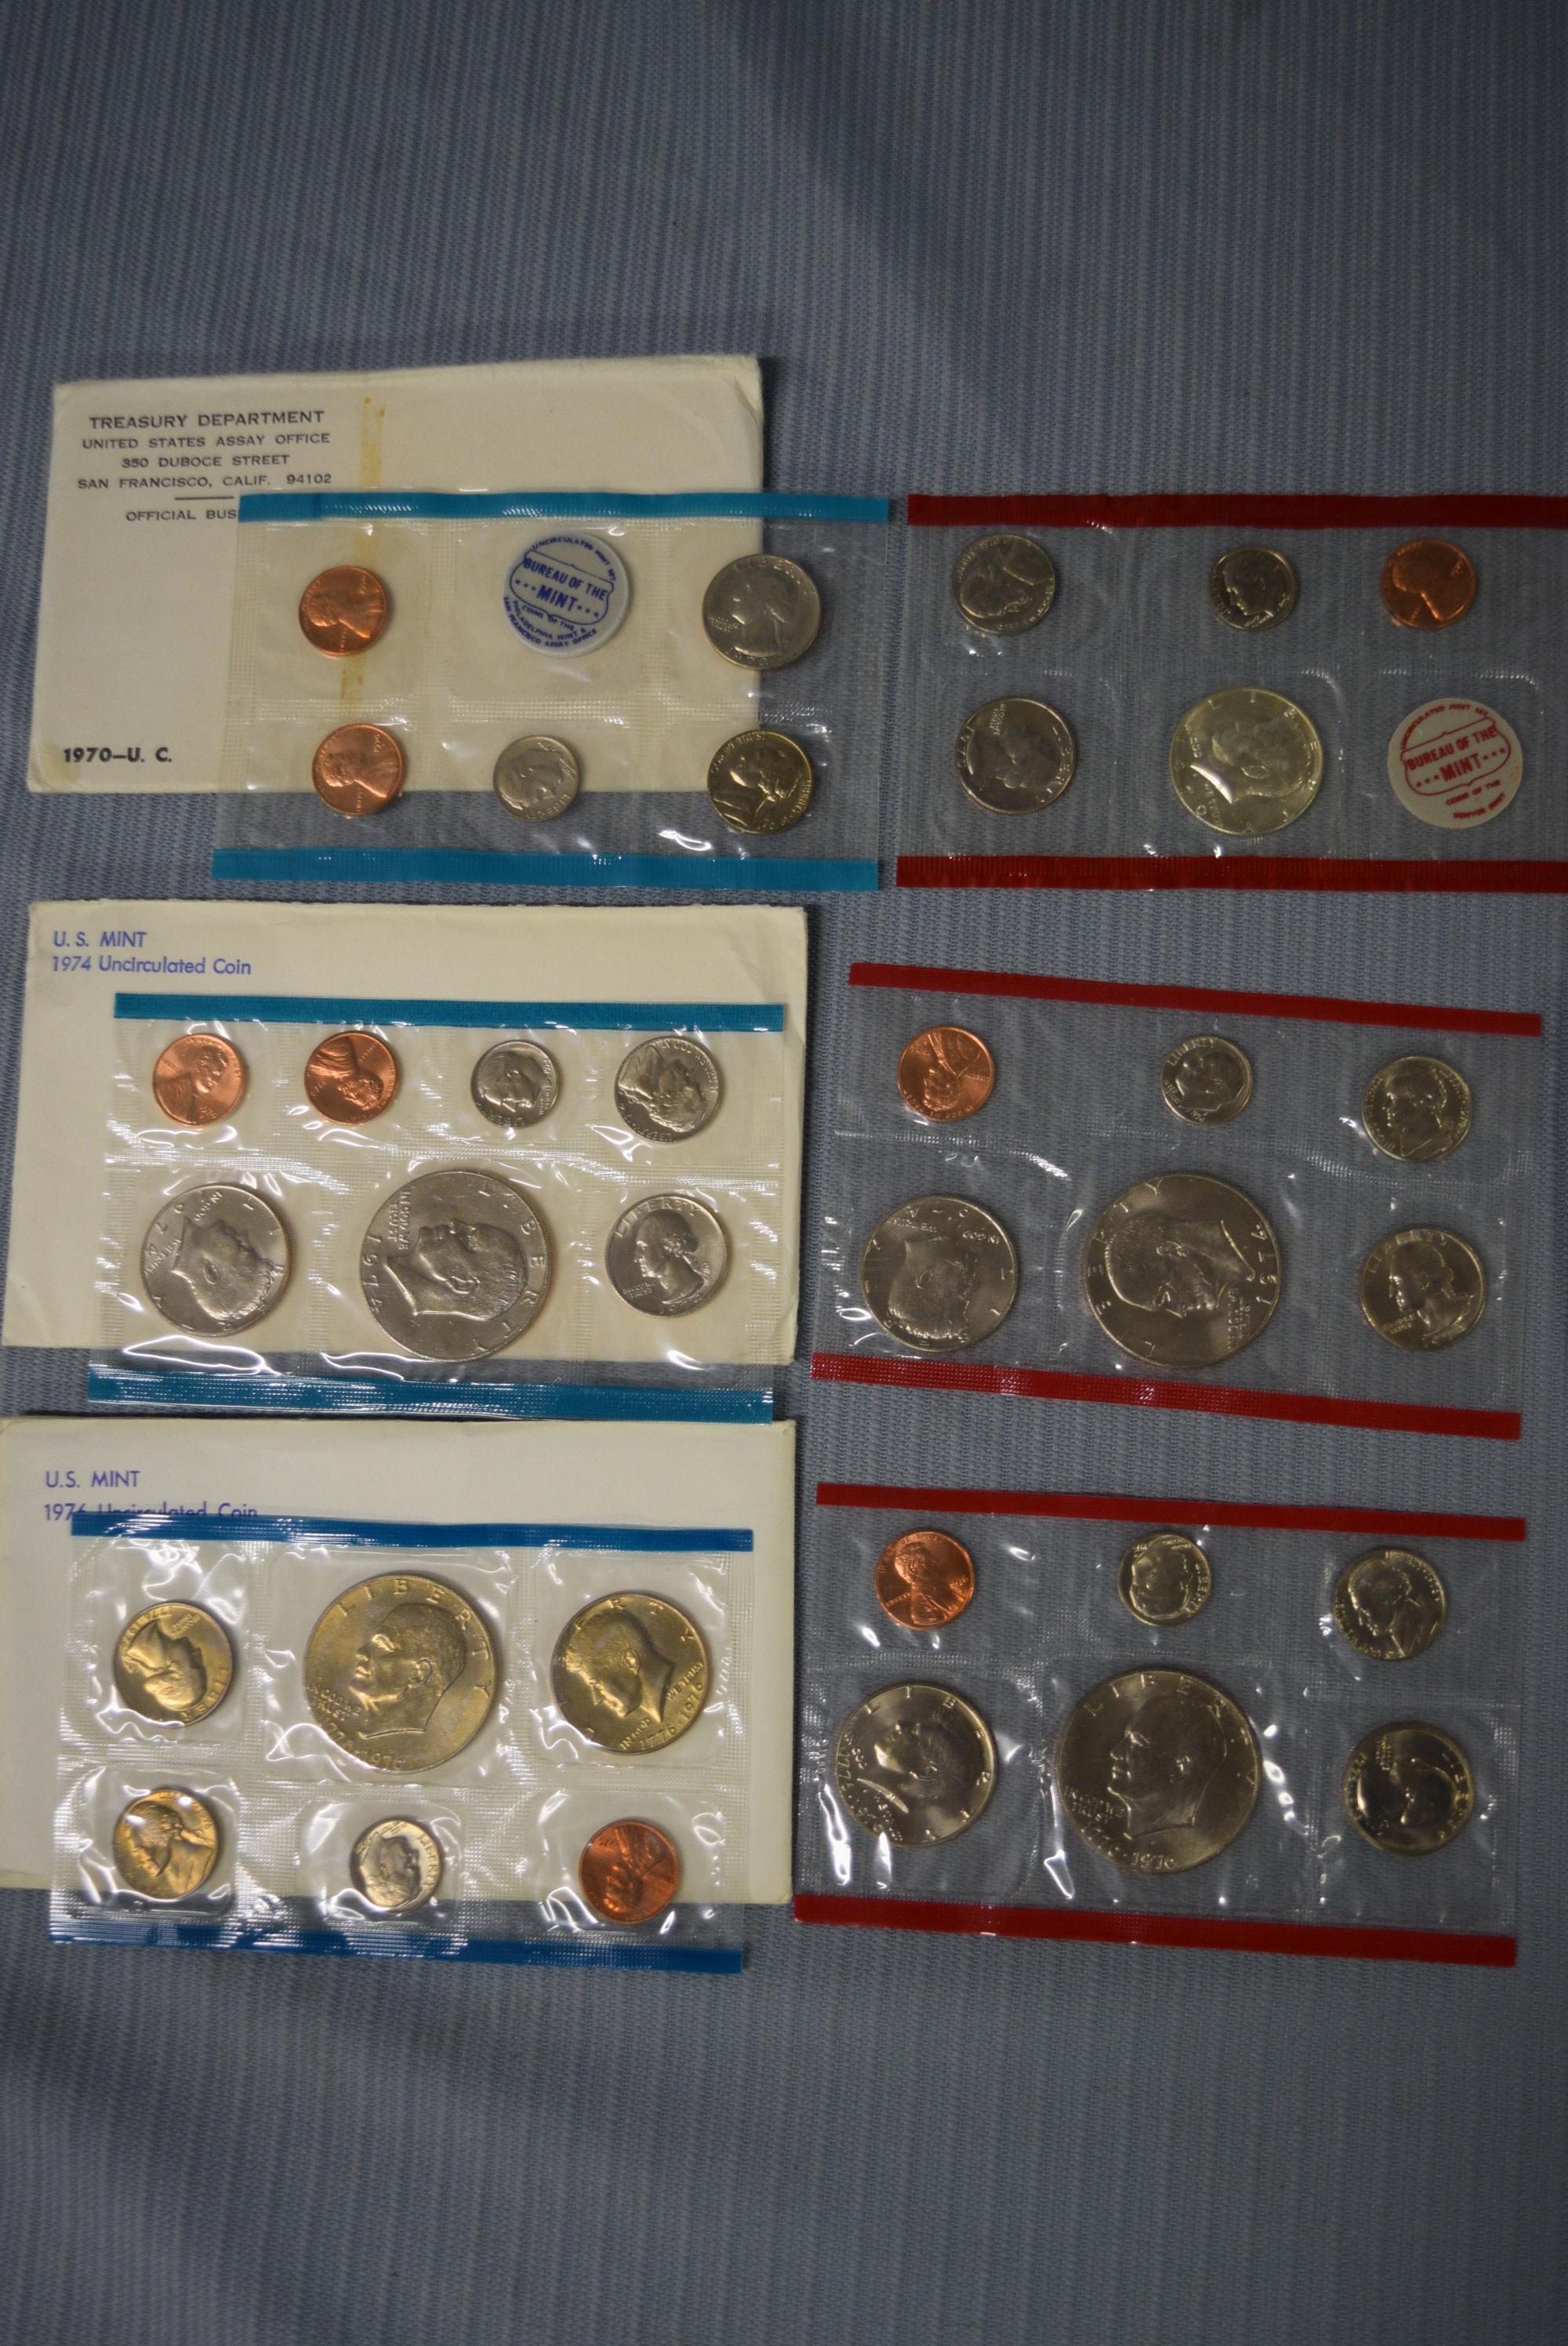 6 SETS OF UNCIRCULATED COINS!